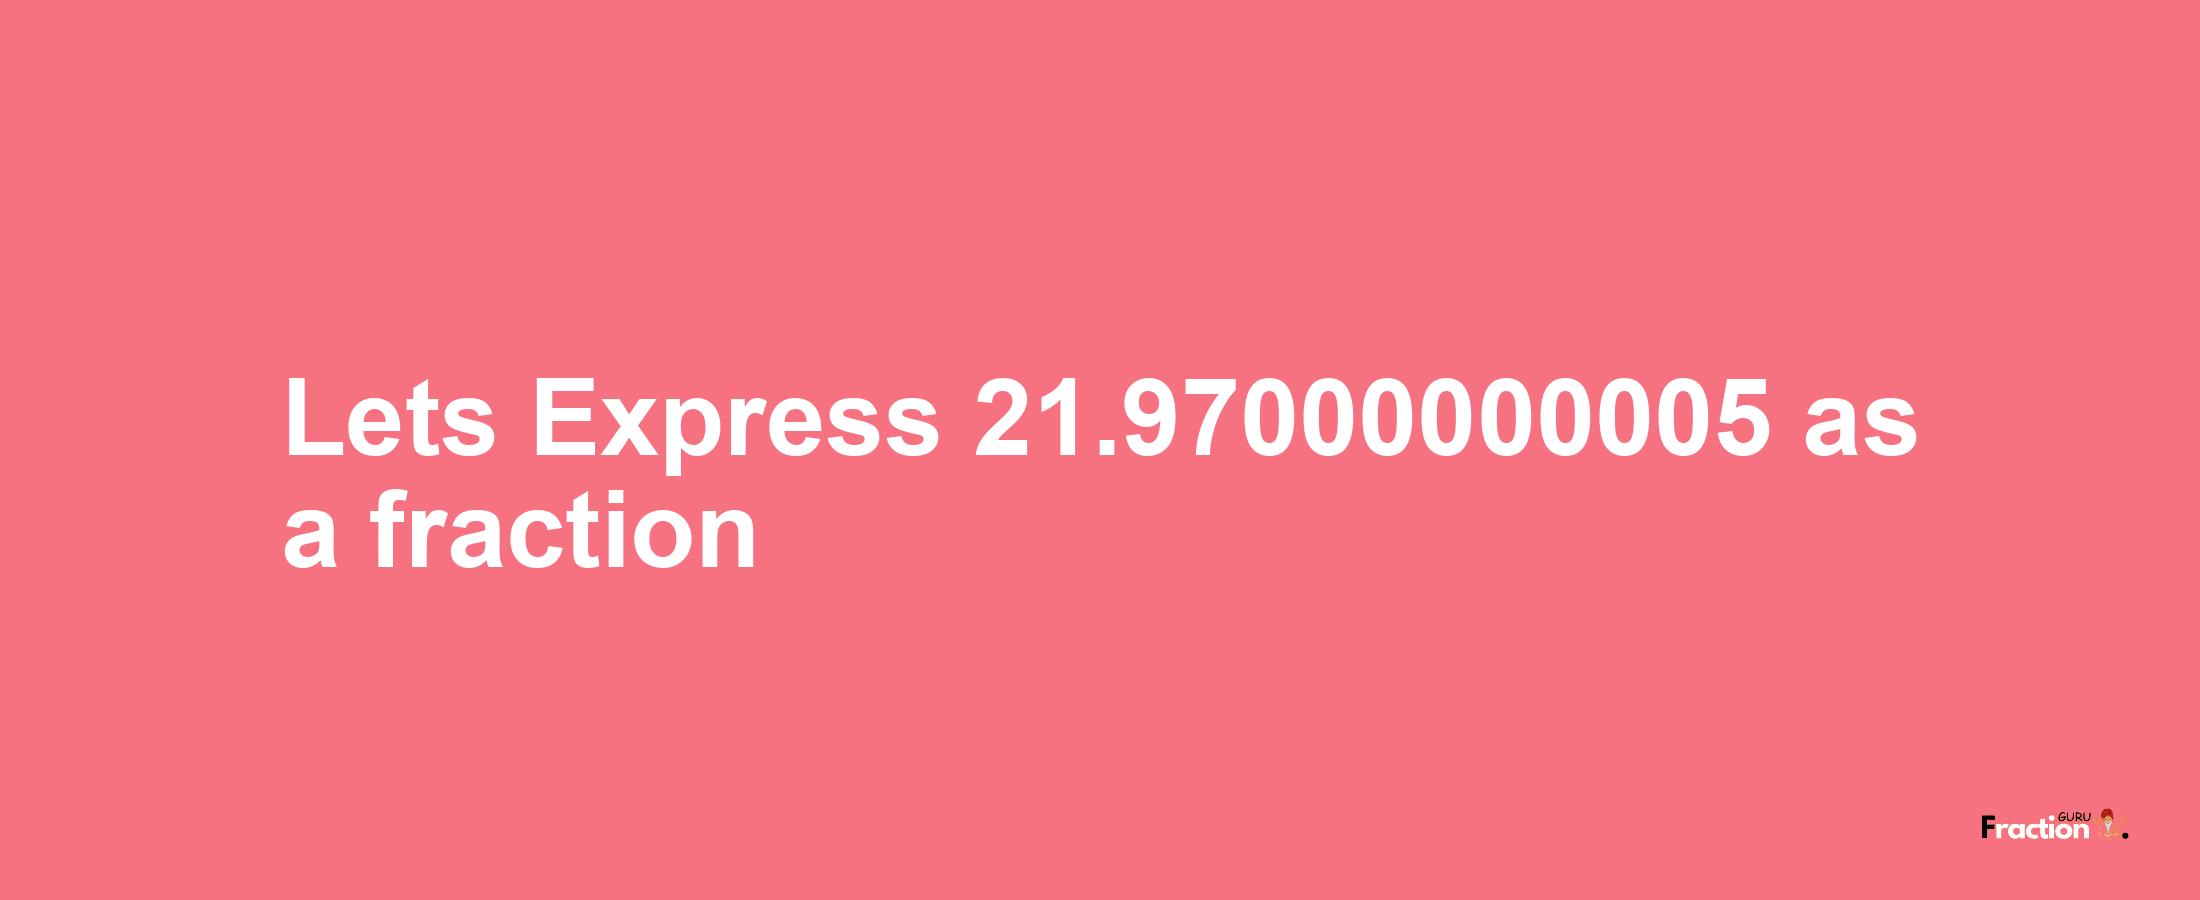 Lets Express 21.97000000005 as afraction